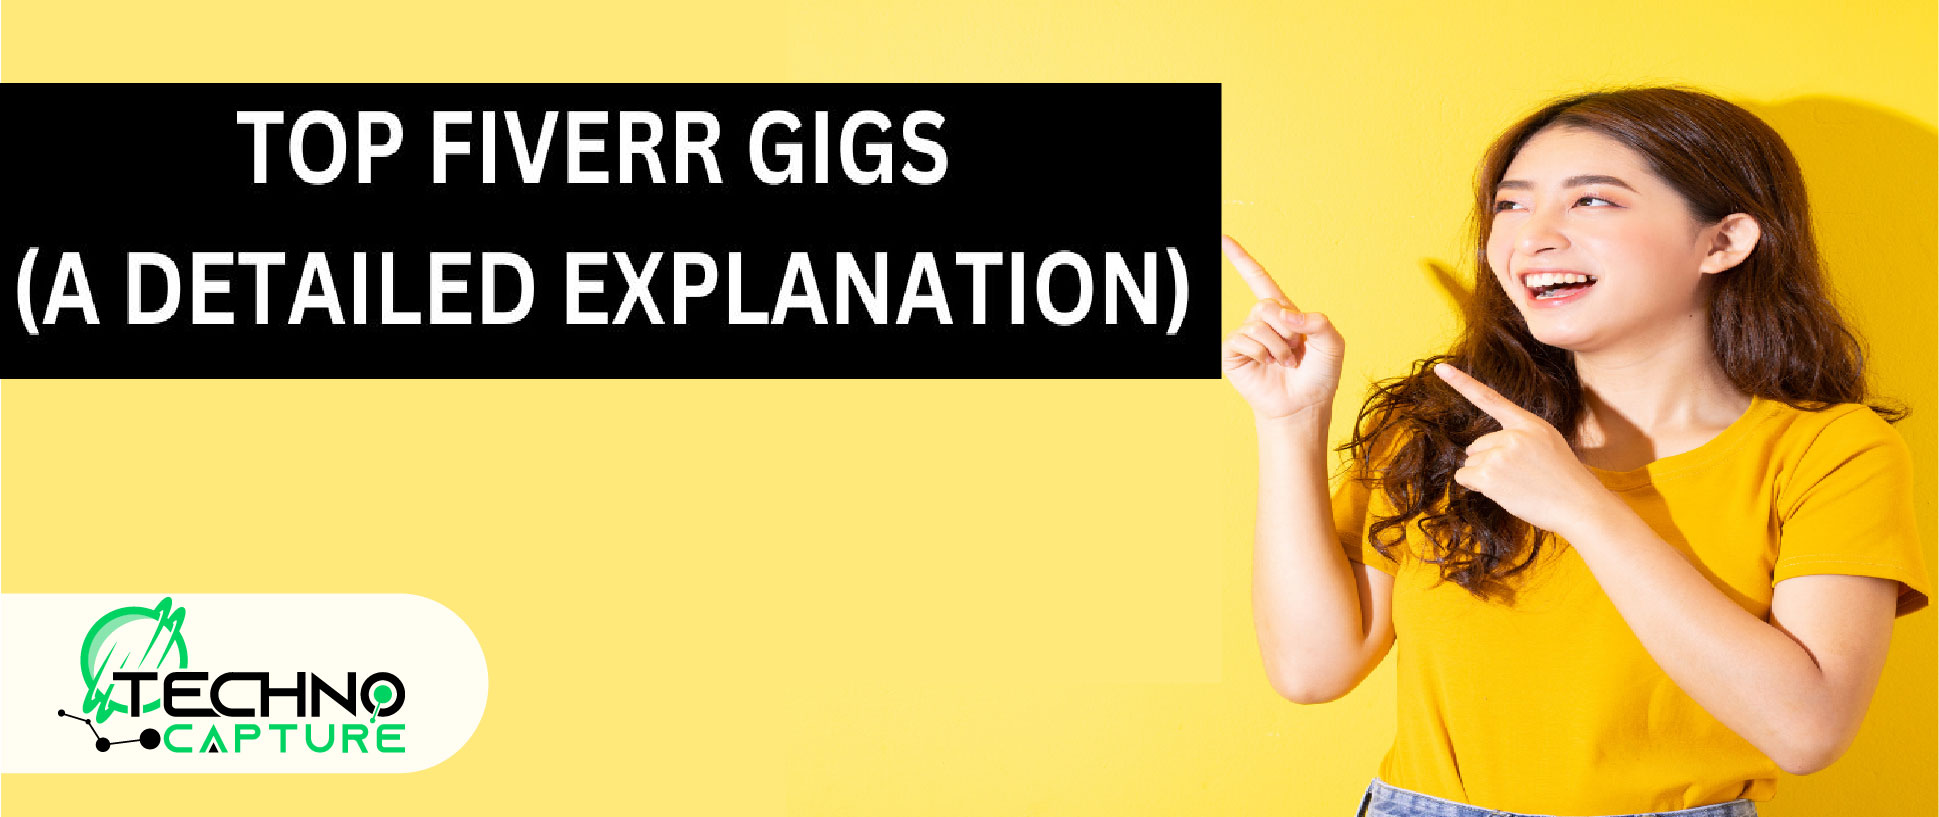  Top Fiverr Gigs (A Detailed Explanation)